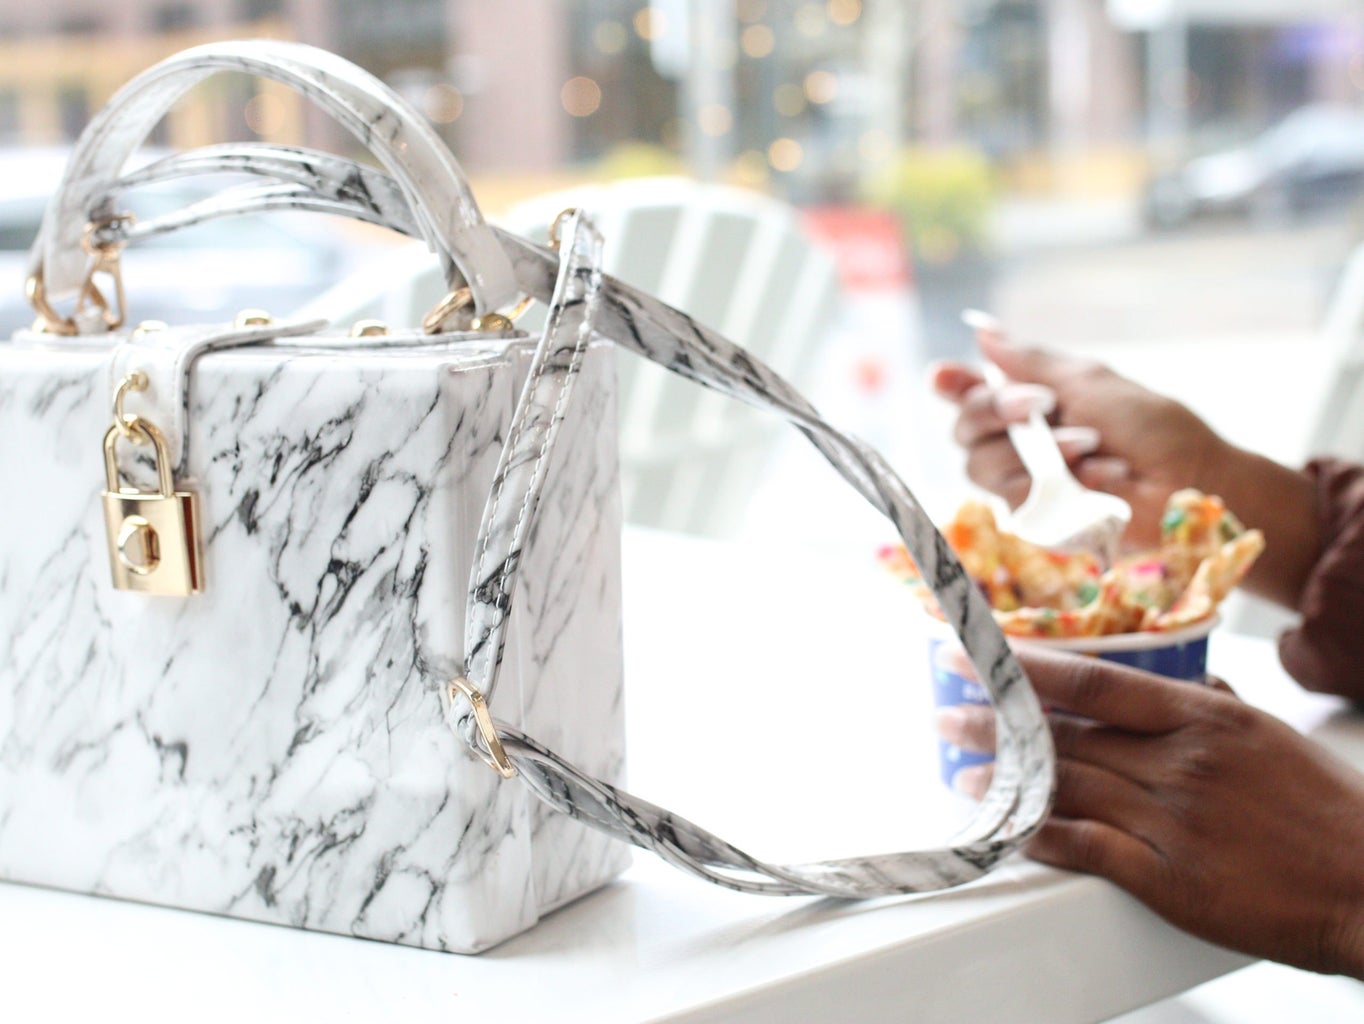 white purse with person eating dessert in the background